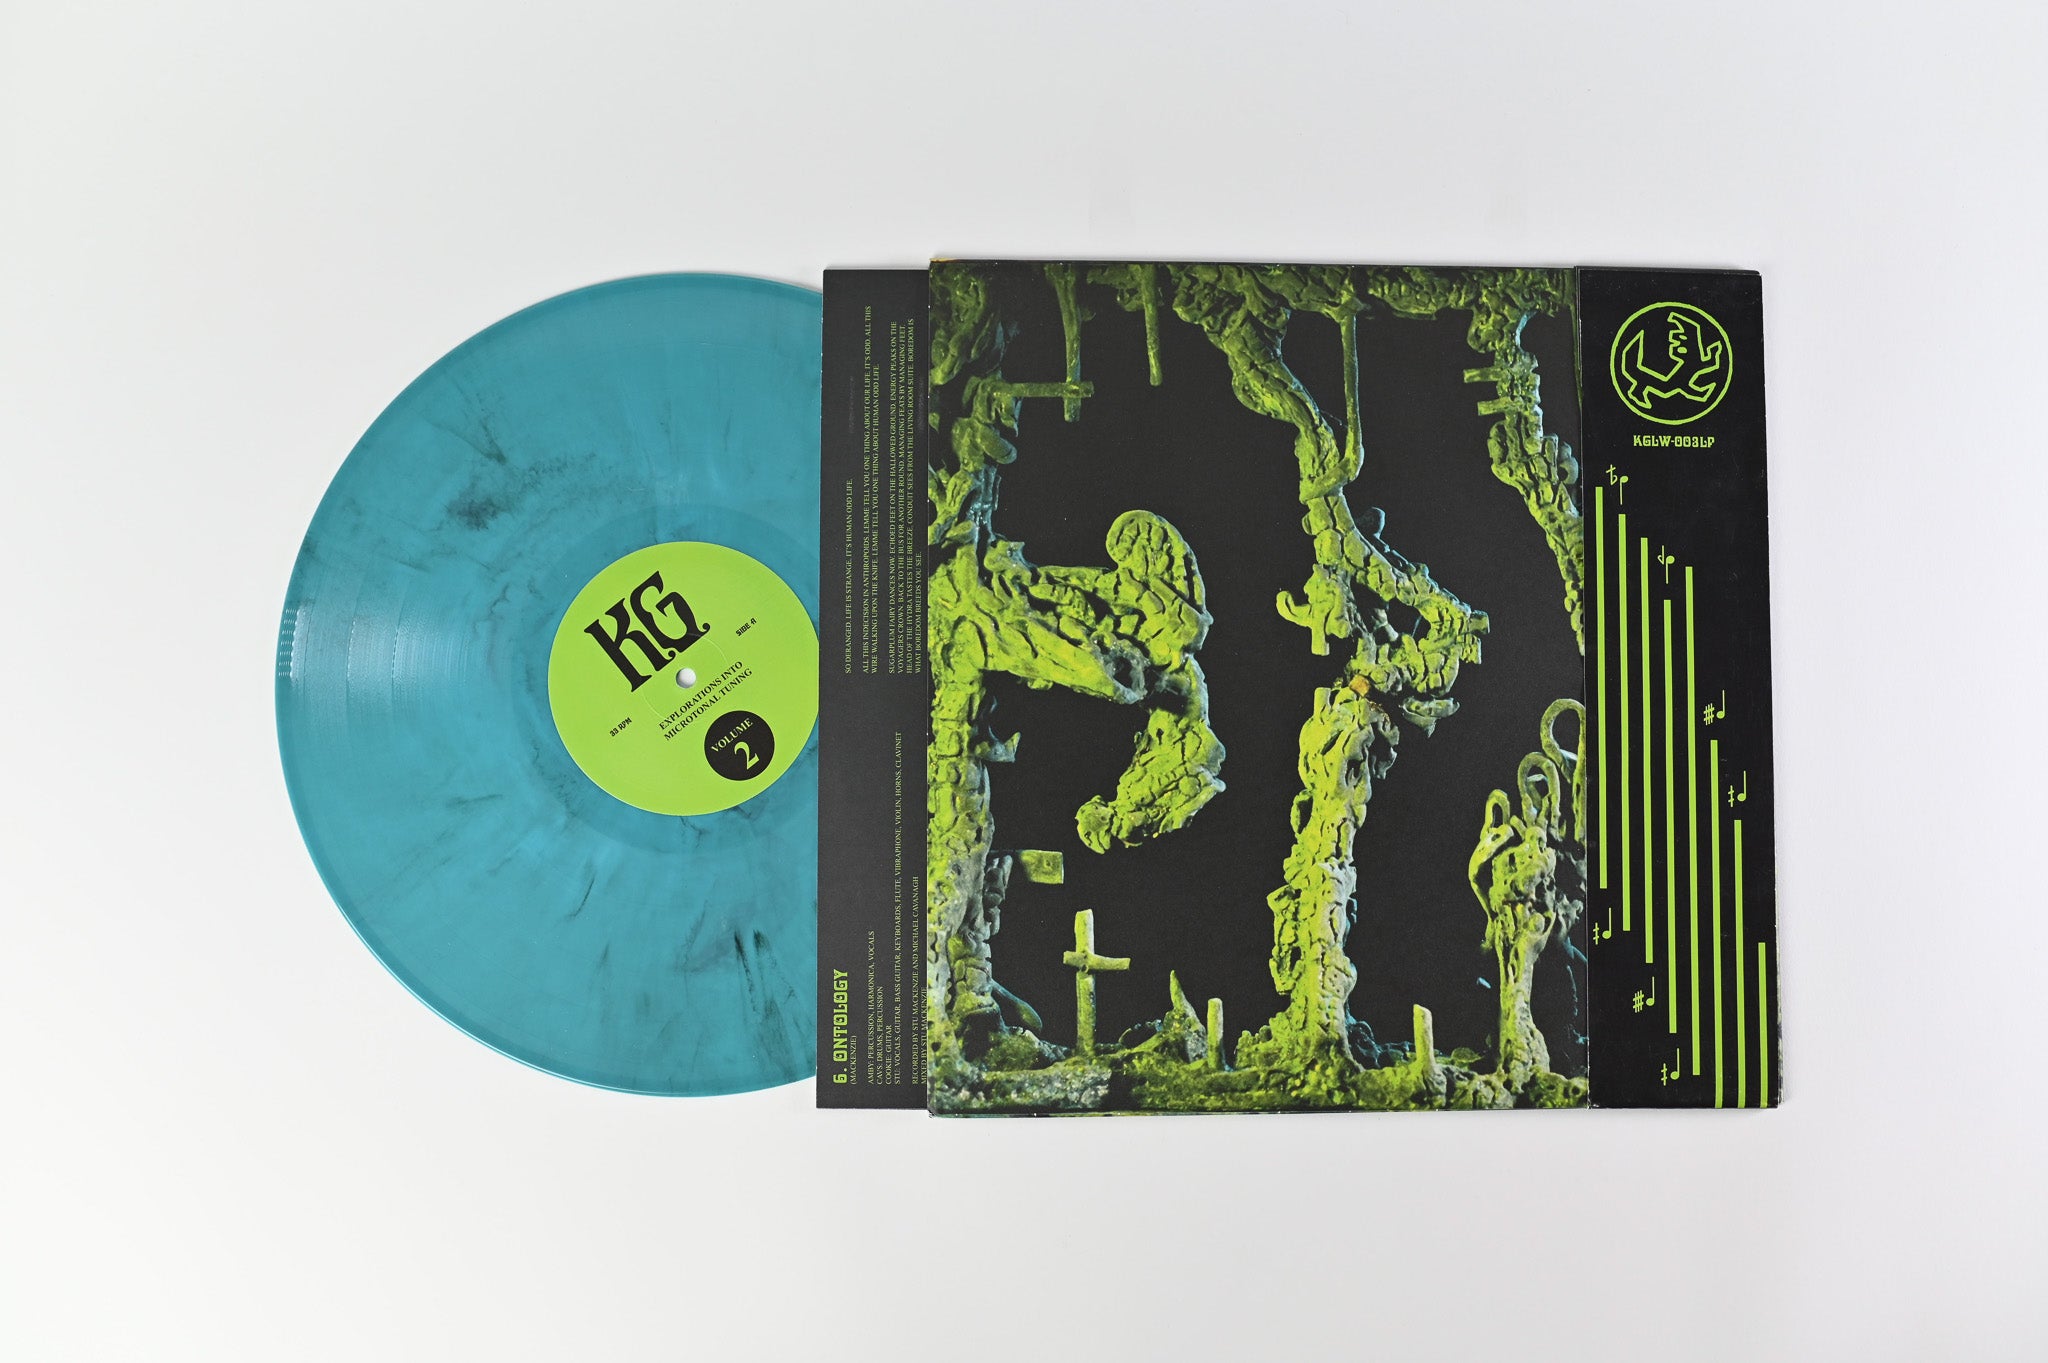 King Gizzard And The Lizard Wizard - K.G. (Explorations Into Microtonal Tuning Volume 2) Self-Released on Blue w/Black Smoke Vinyl